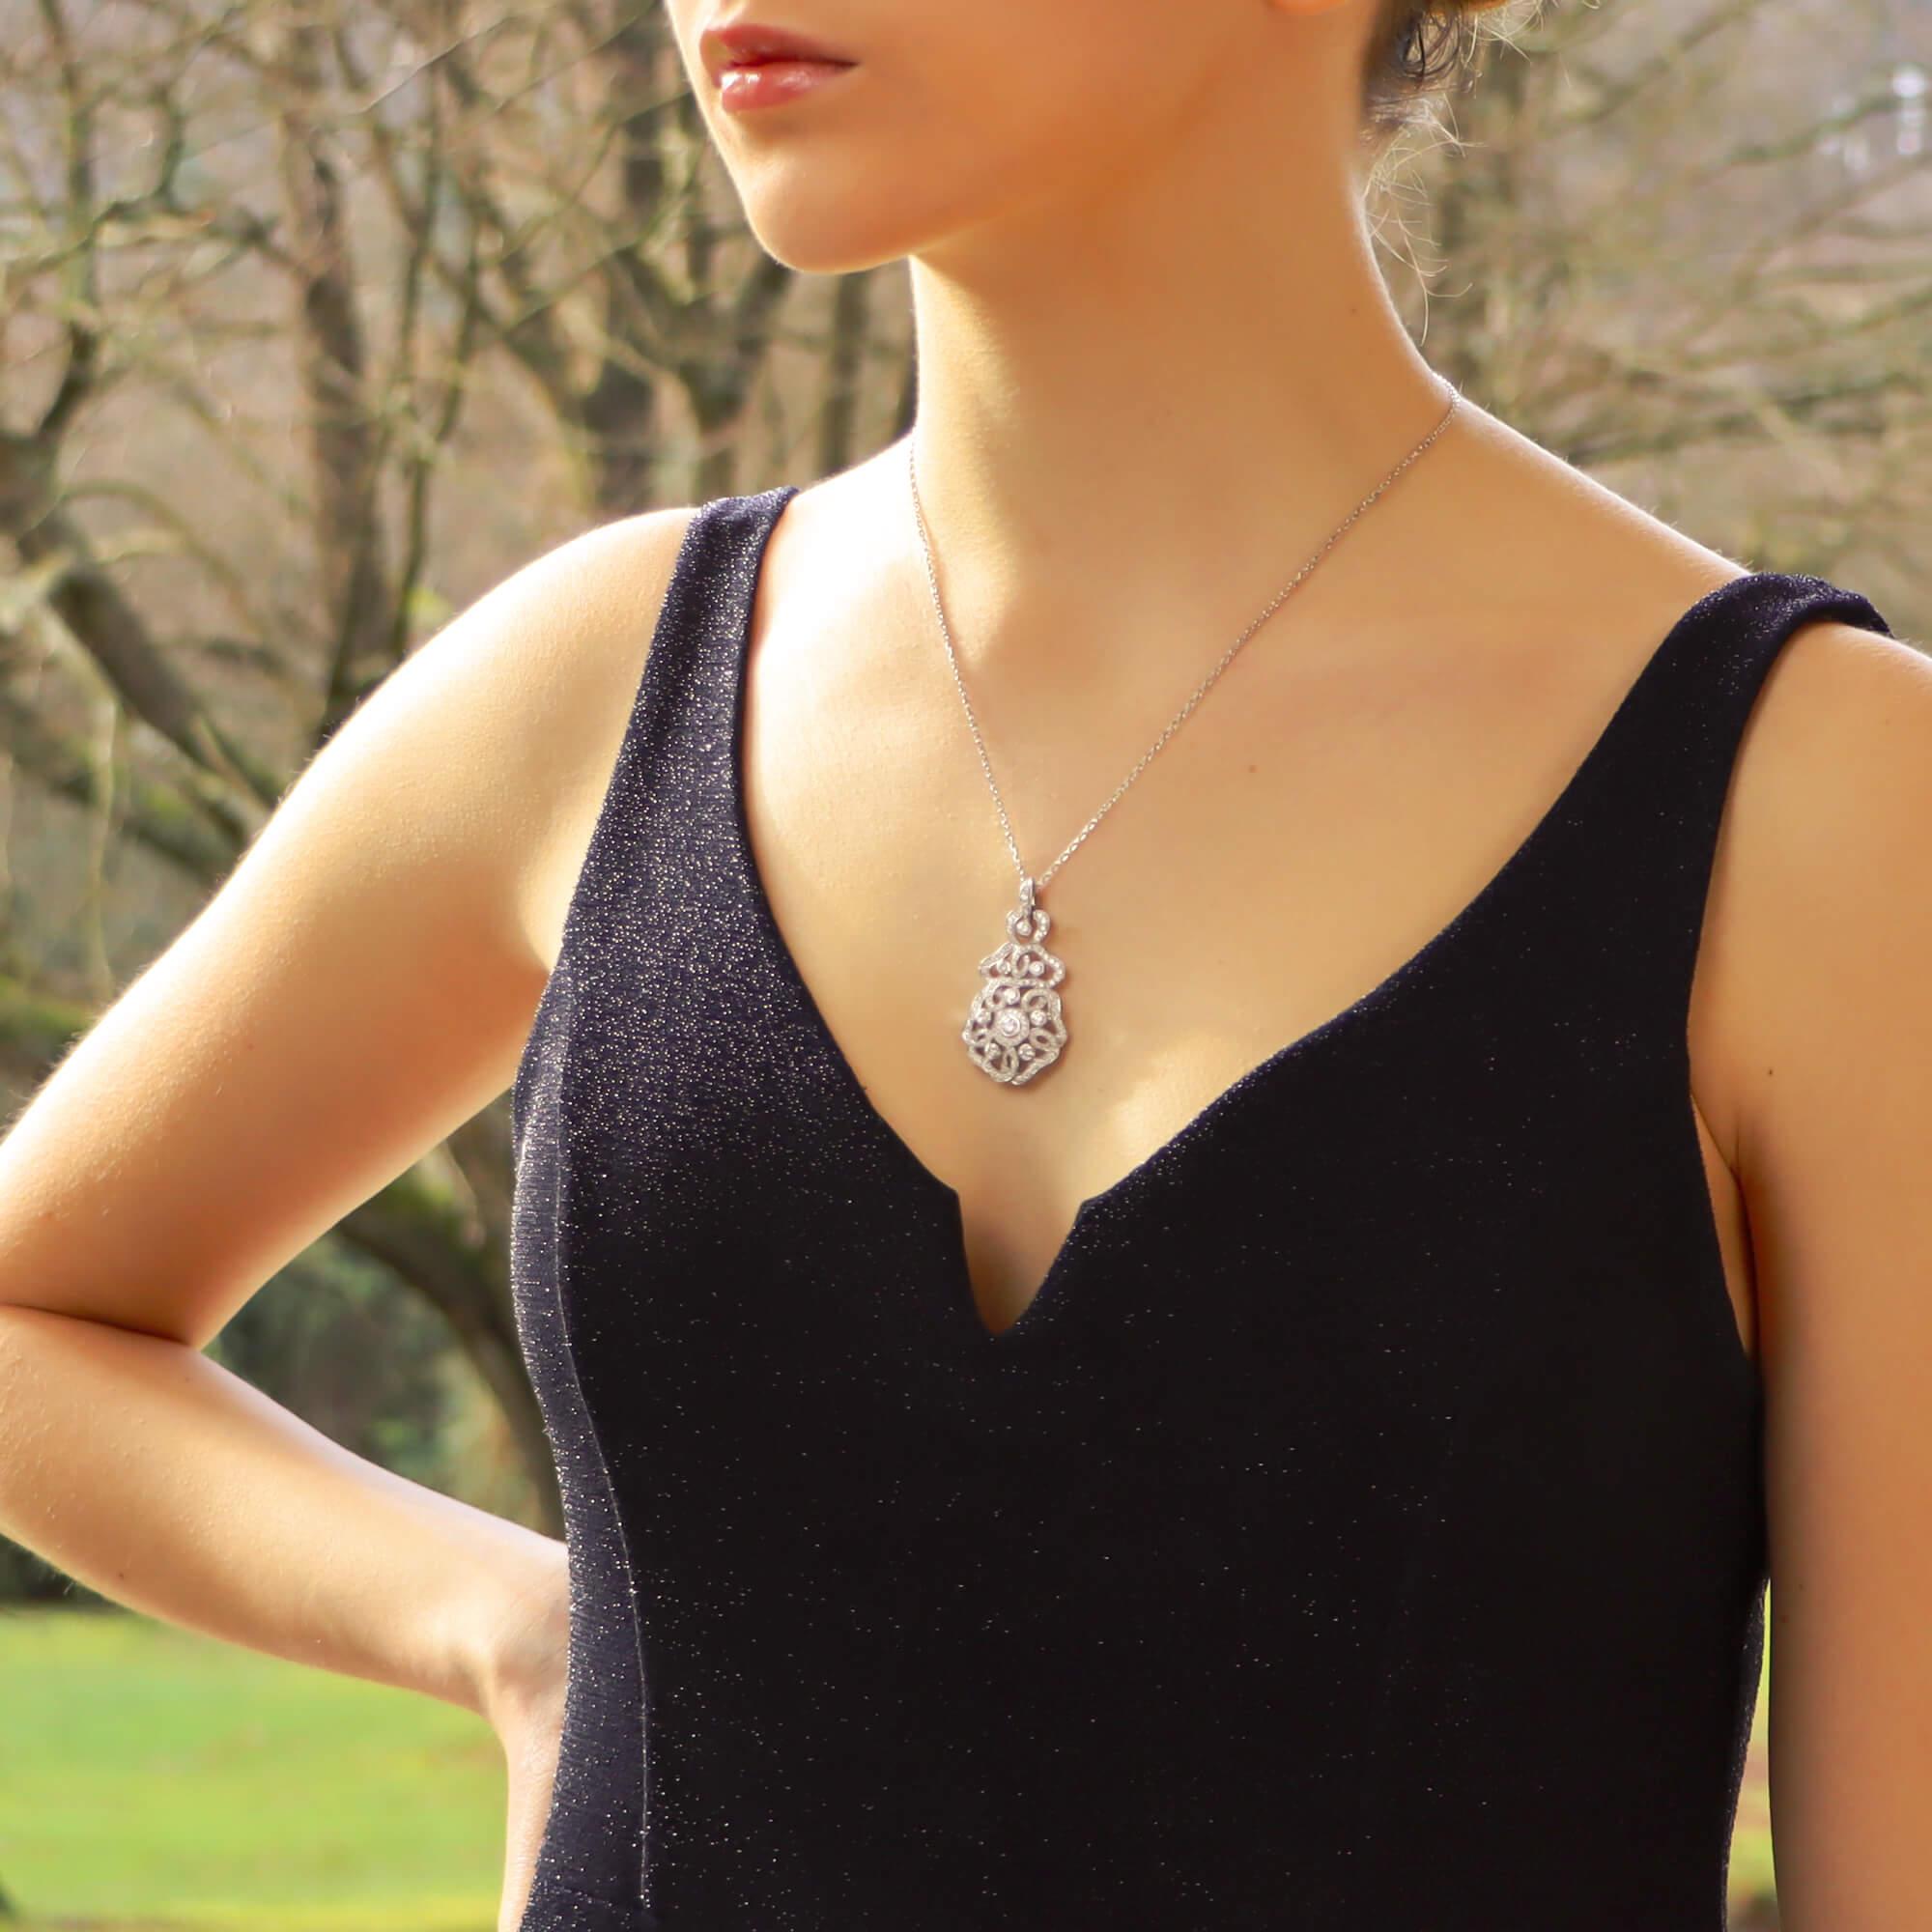 An extremely elegant Garrard Tudor Rose diamond pendant set in 18k white gold. 

The pendant is set with exactly 175 round brilliant cut diamonds and depicts a modern take on the traditional Tudor Rose motif. The rose itself is situated towards the